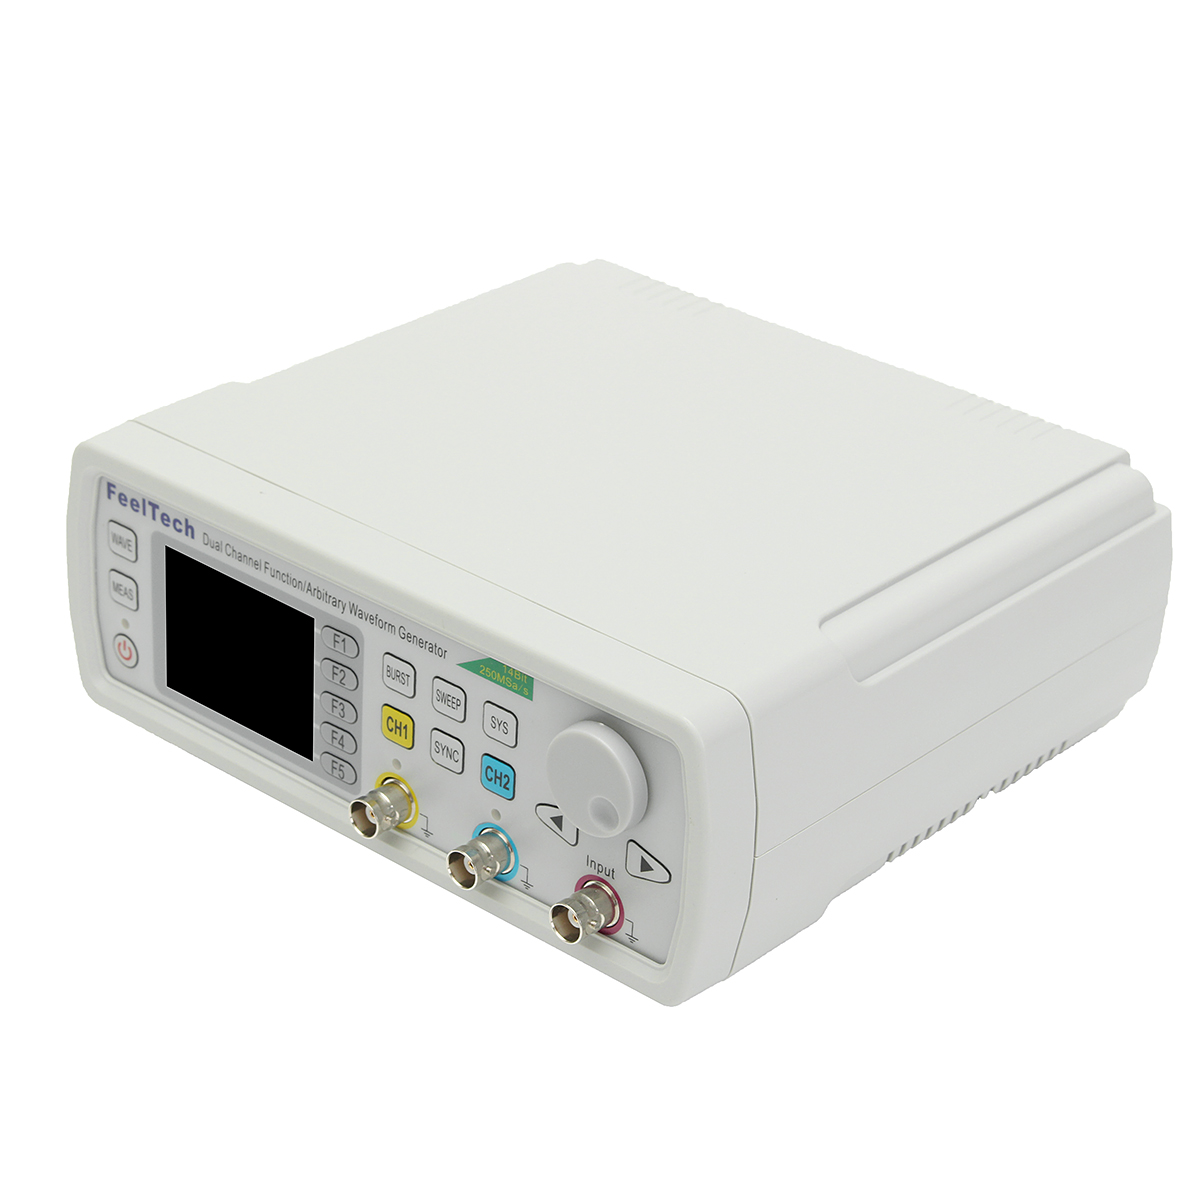 FY6600-Digital-30MHz-60MHz-Dual-Channel-DDS-Function-Arbitrary-Waveform-Signal-Generator-Frequency-M-1957884-5